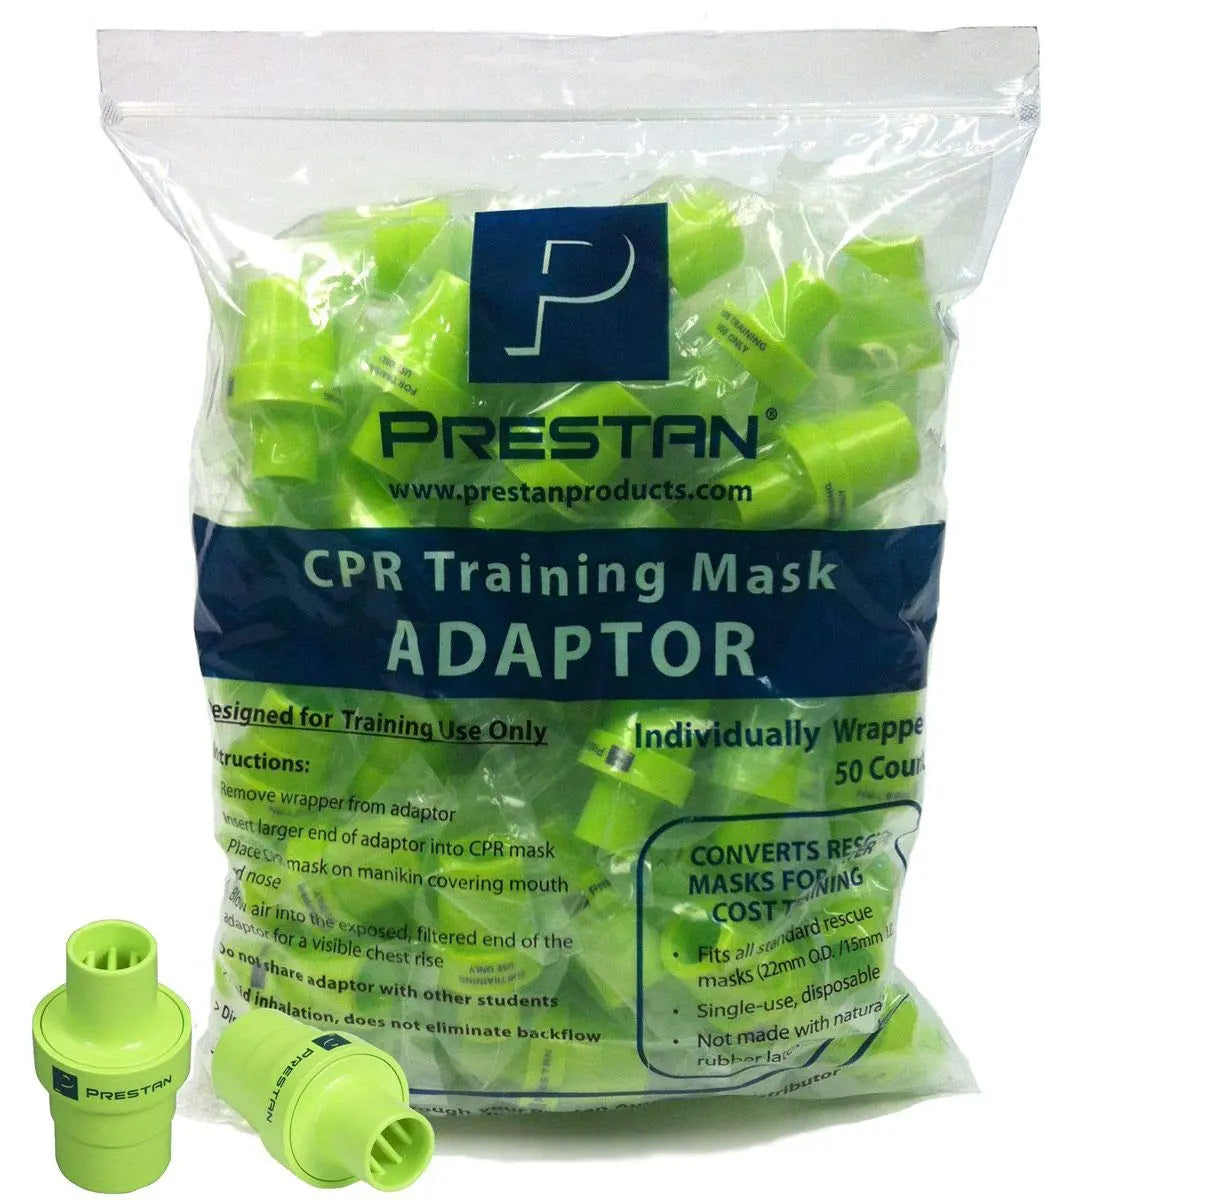 PRESTAN RESCUE MASK TRAINING ADAPTER, 50 PER PACK - First Aid Market